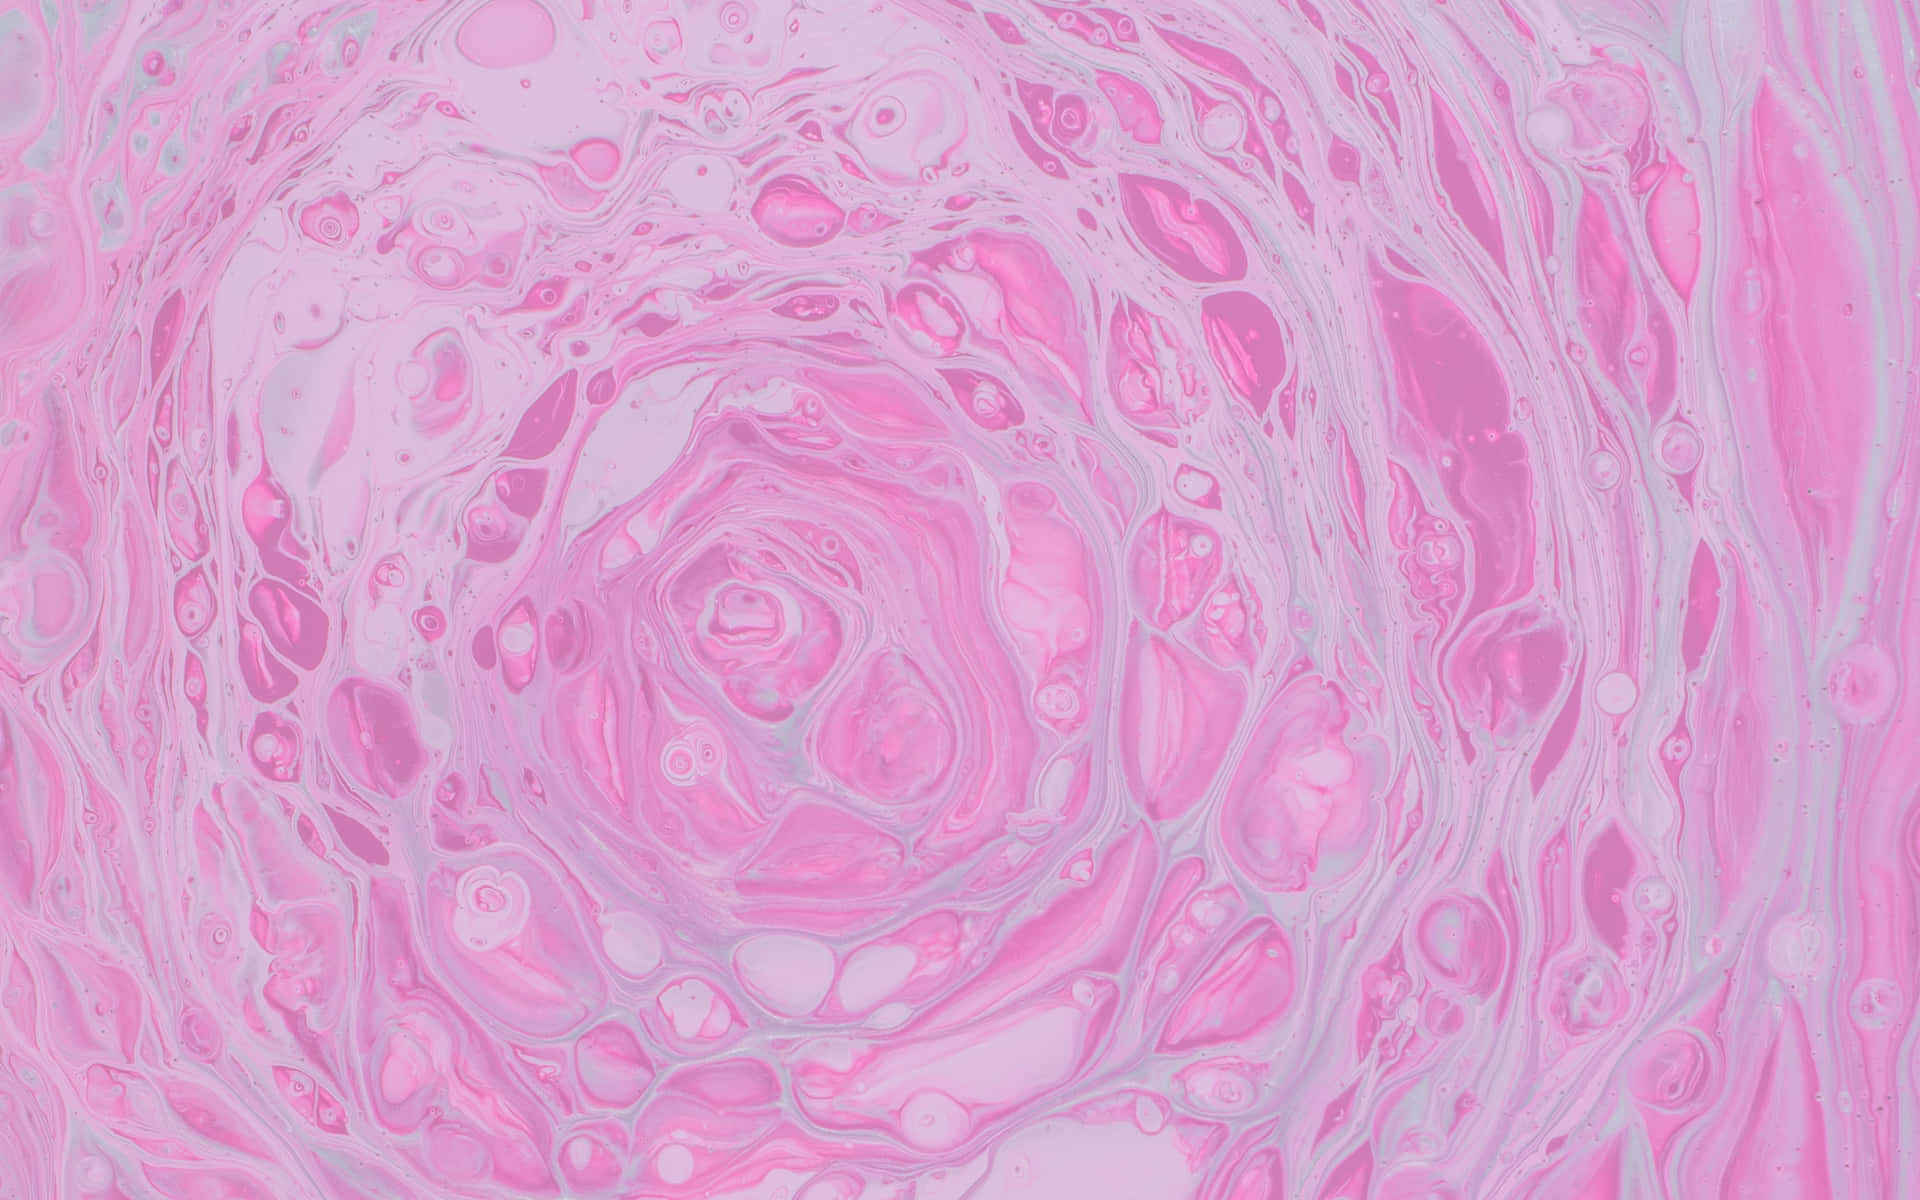 A Pink Swirl Of Liquid With A Swirl Of Bubbles